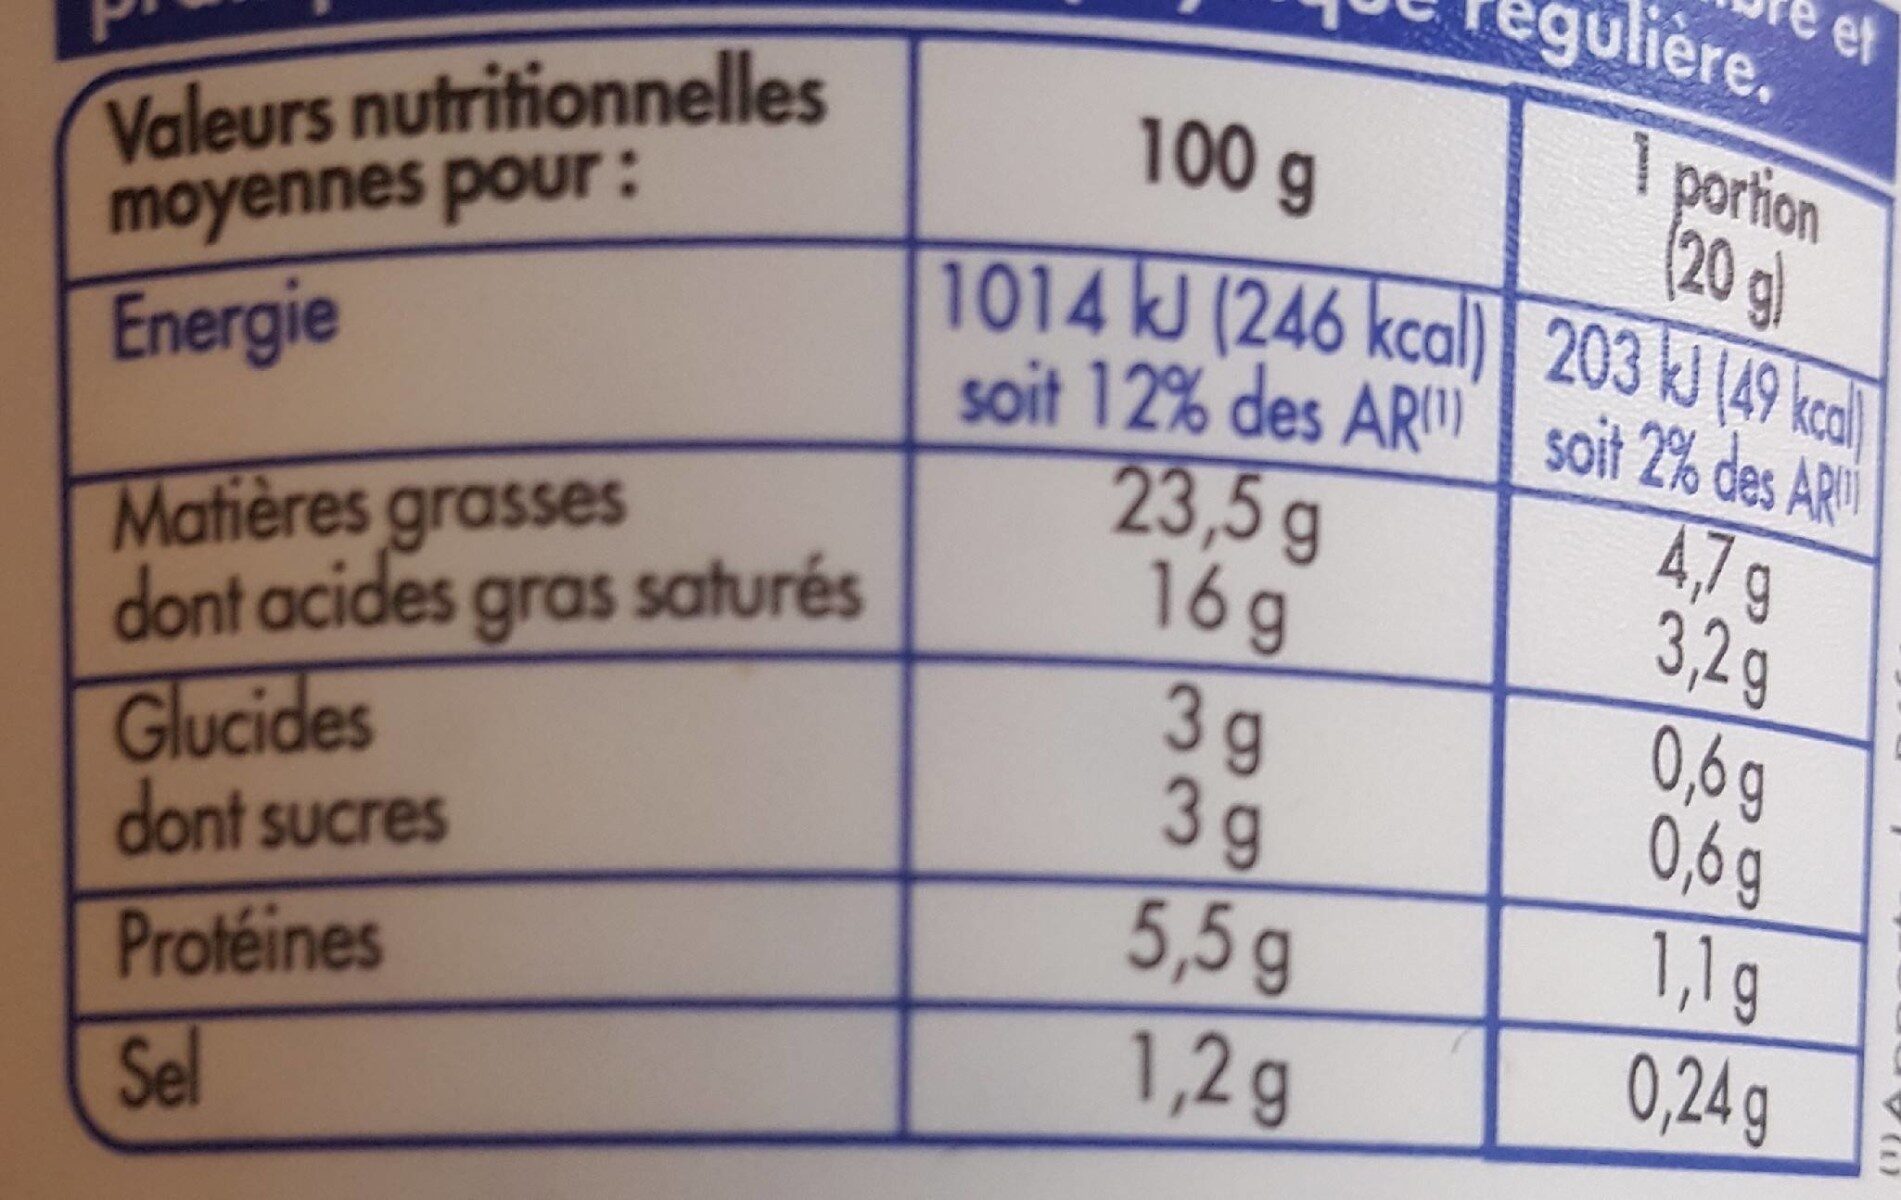 Printendre - Fromage ail et fines herbes - Nutrition facts - fr